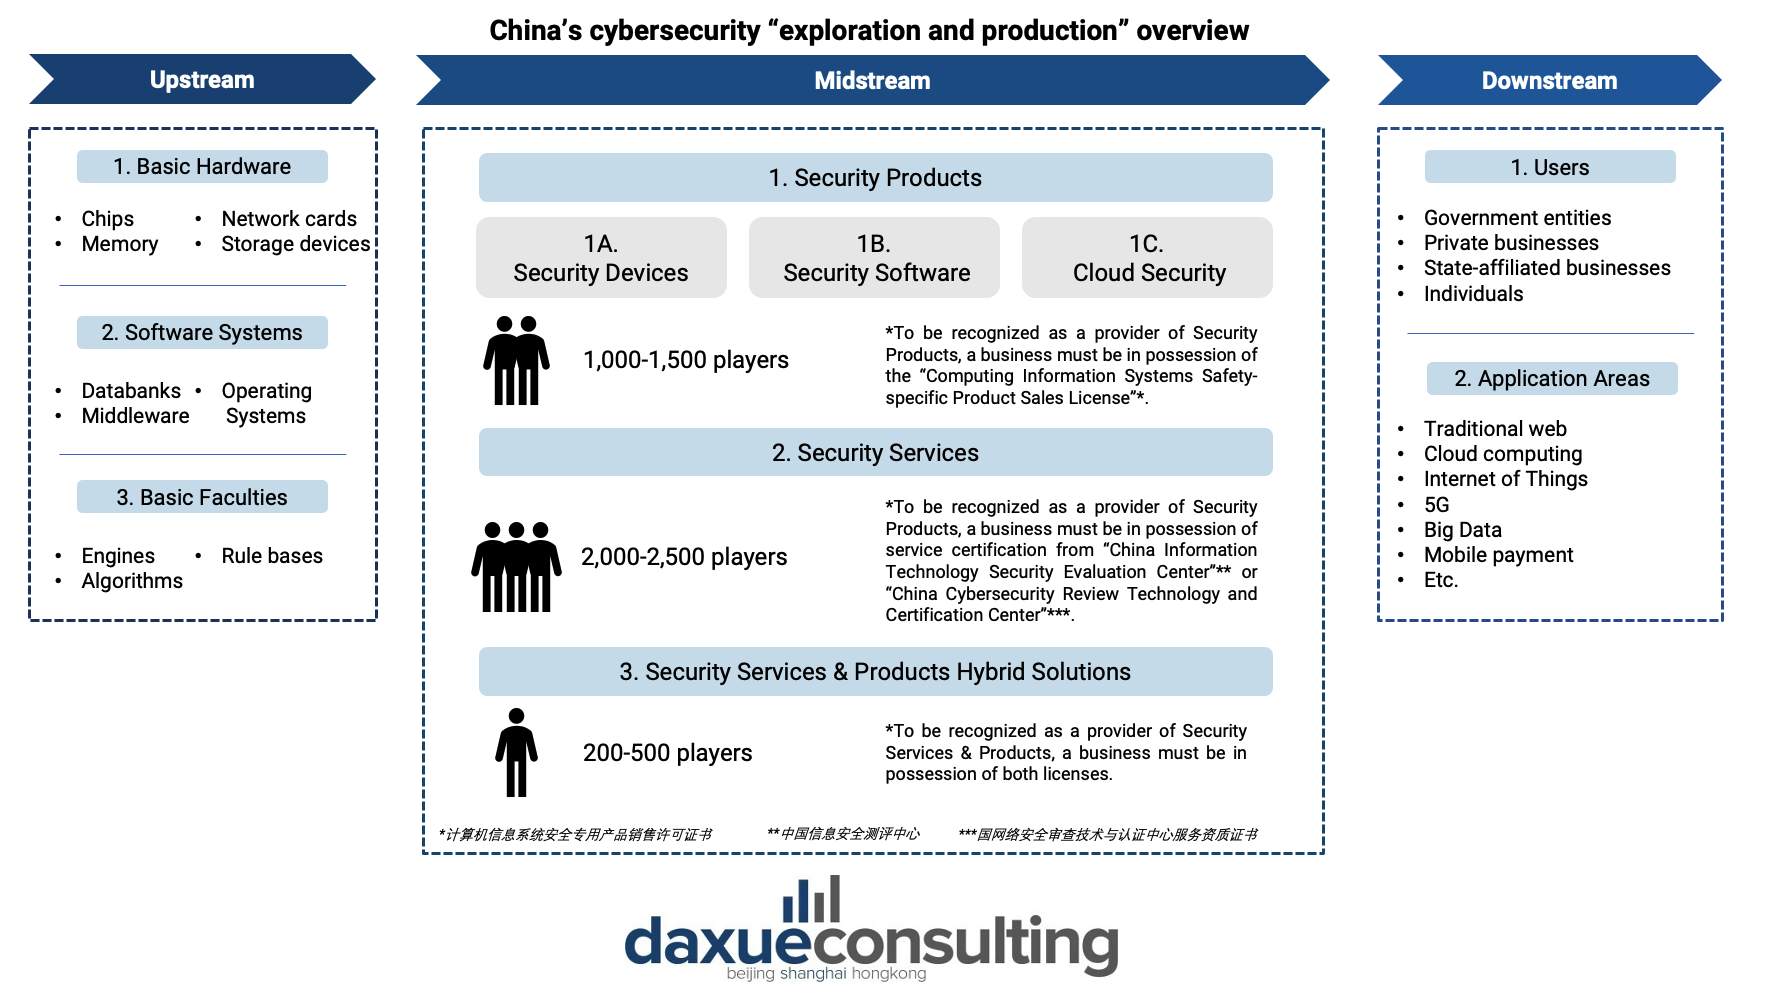 China’s cybersecurity industry